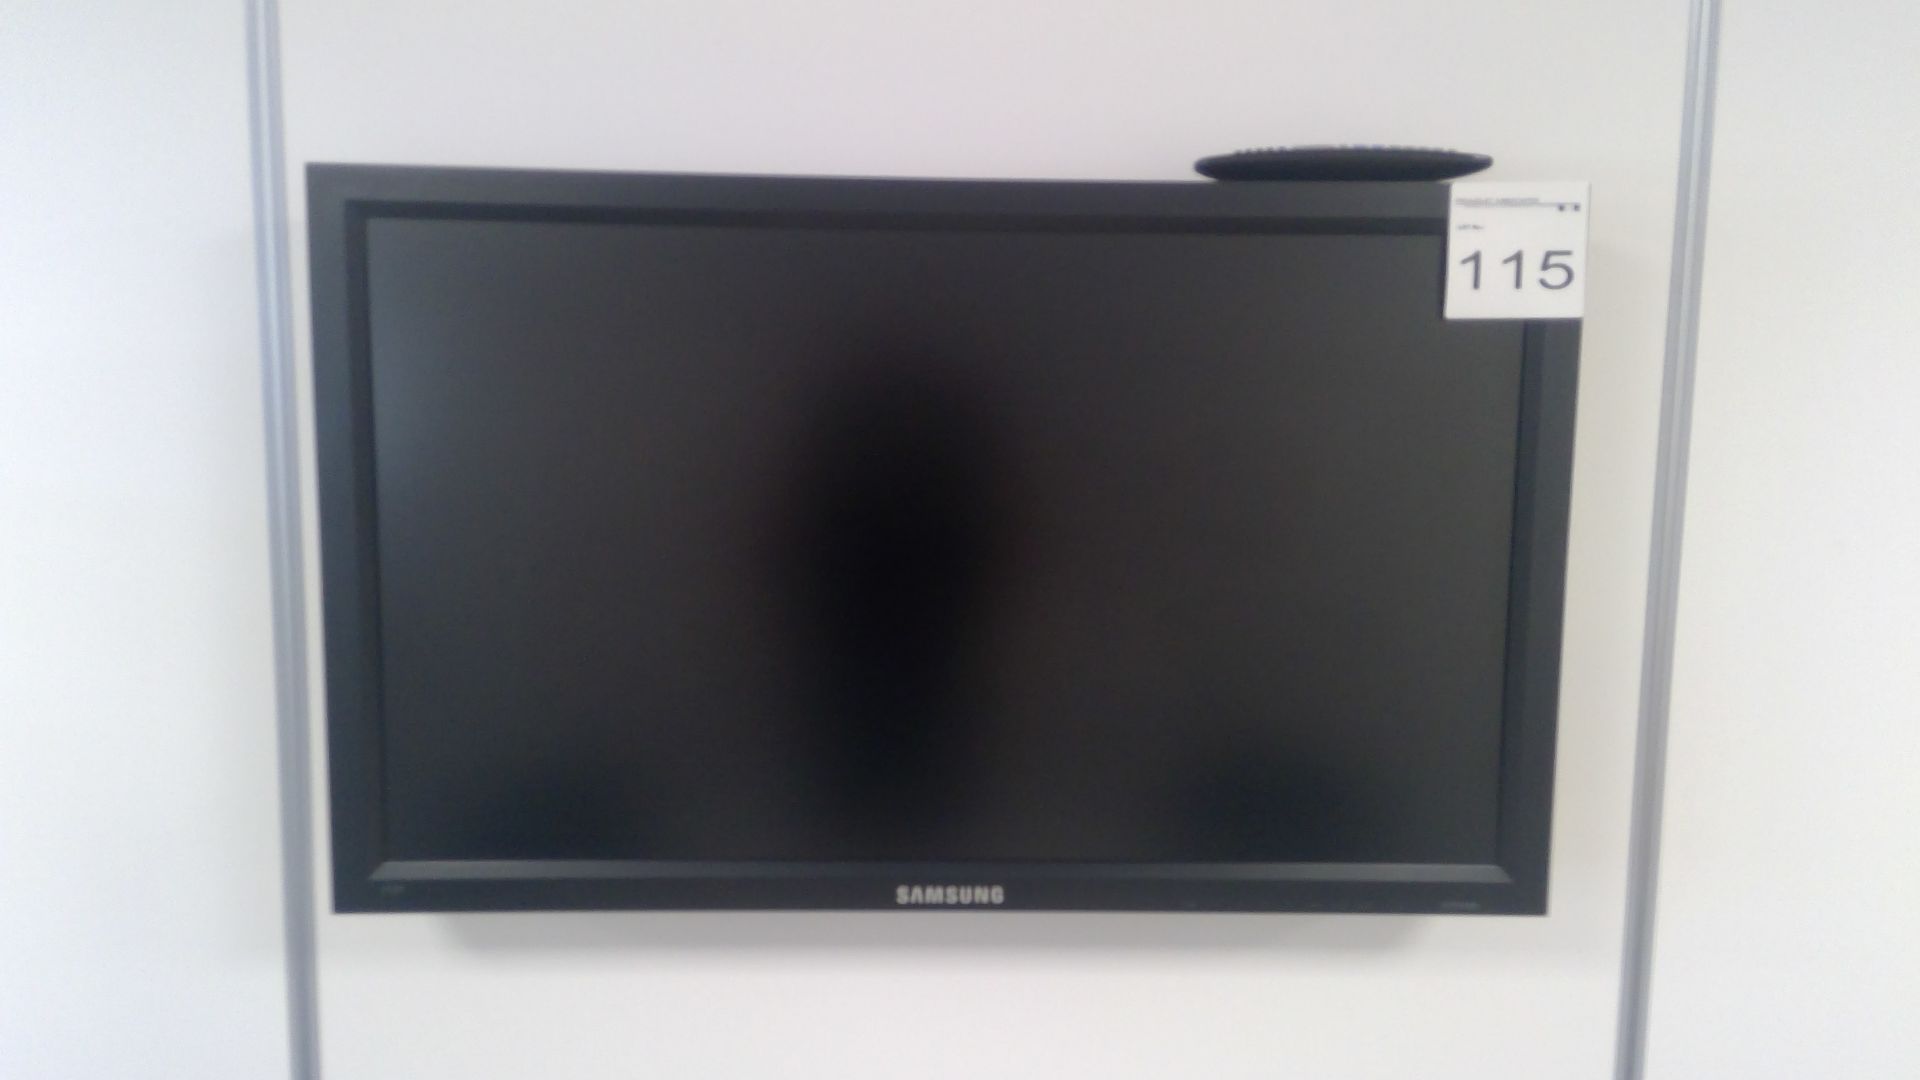 Samsung LH40 32" LCD TV with remote and wall mounting